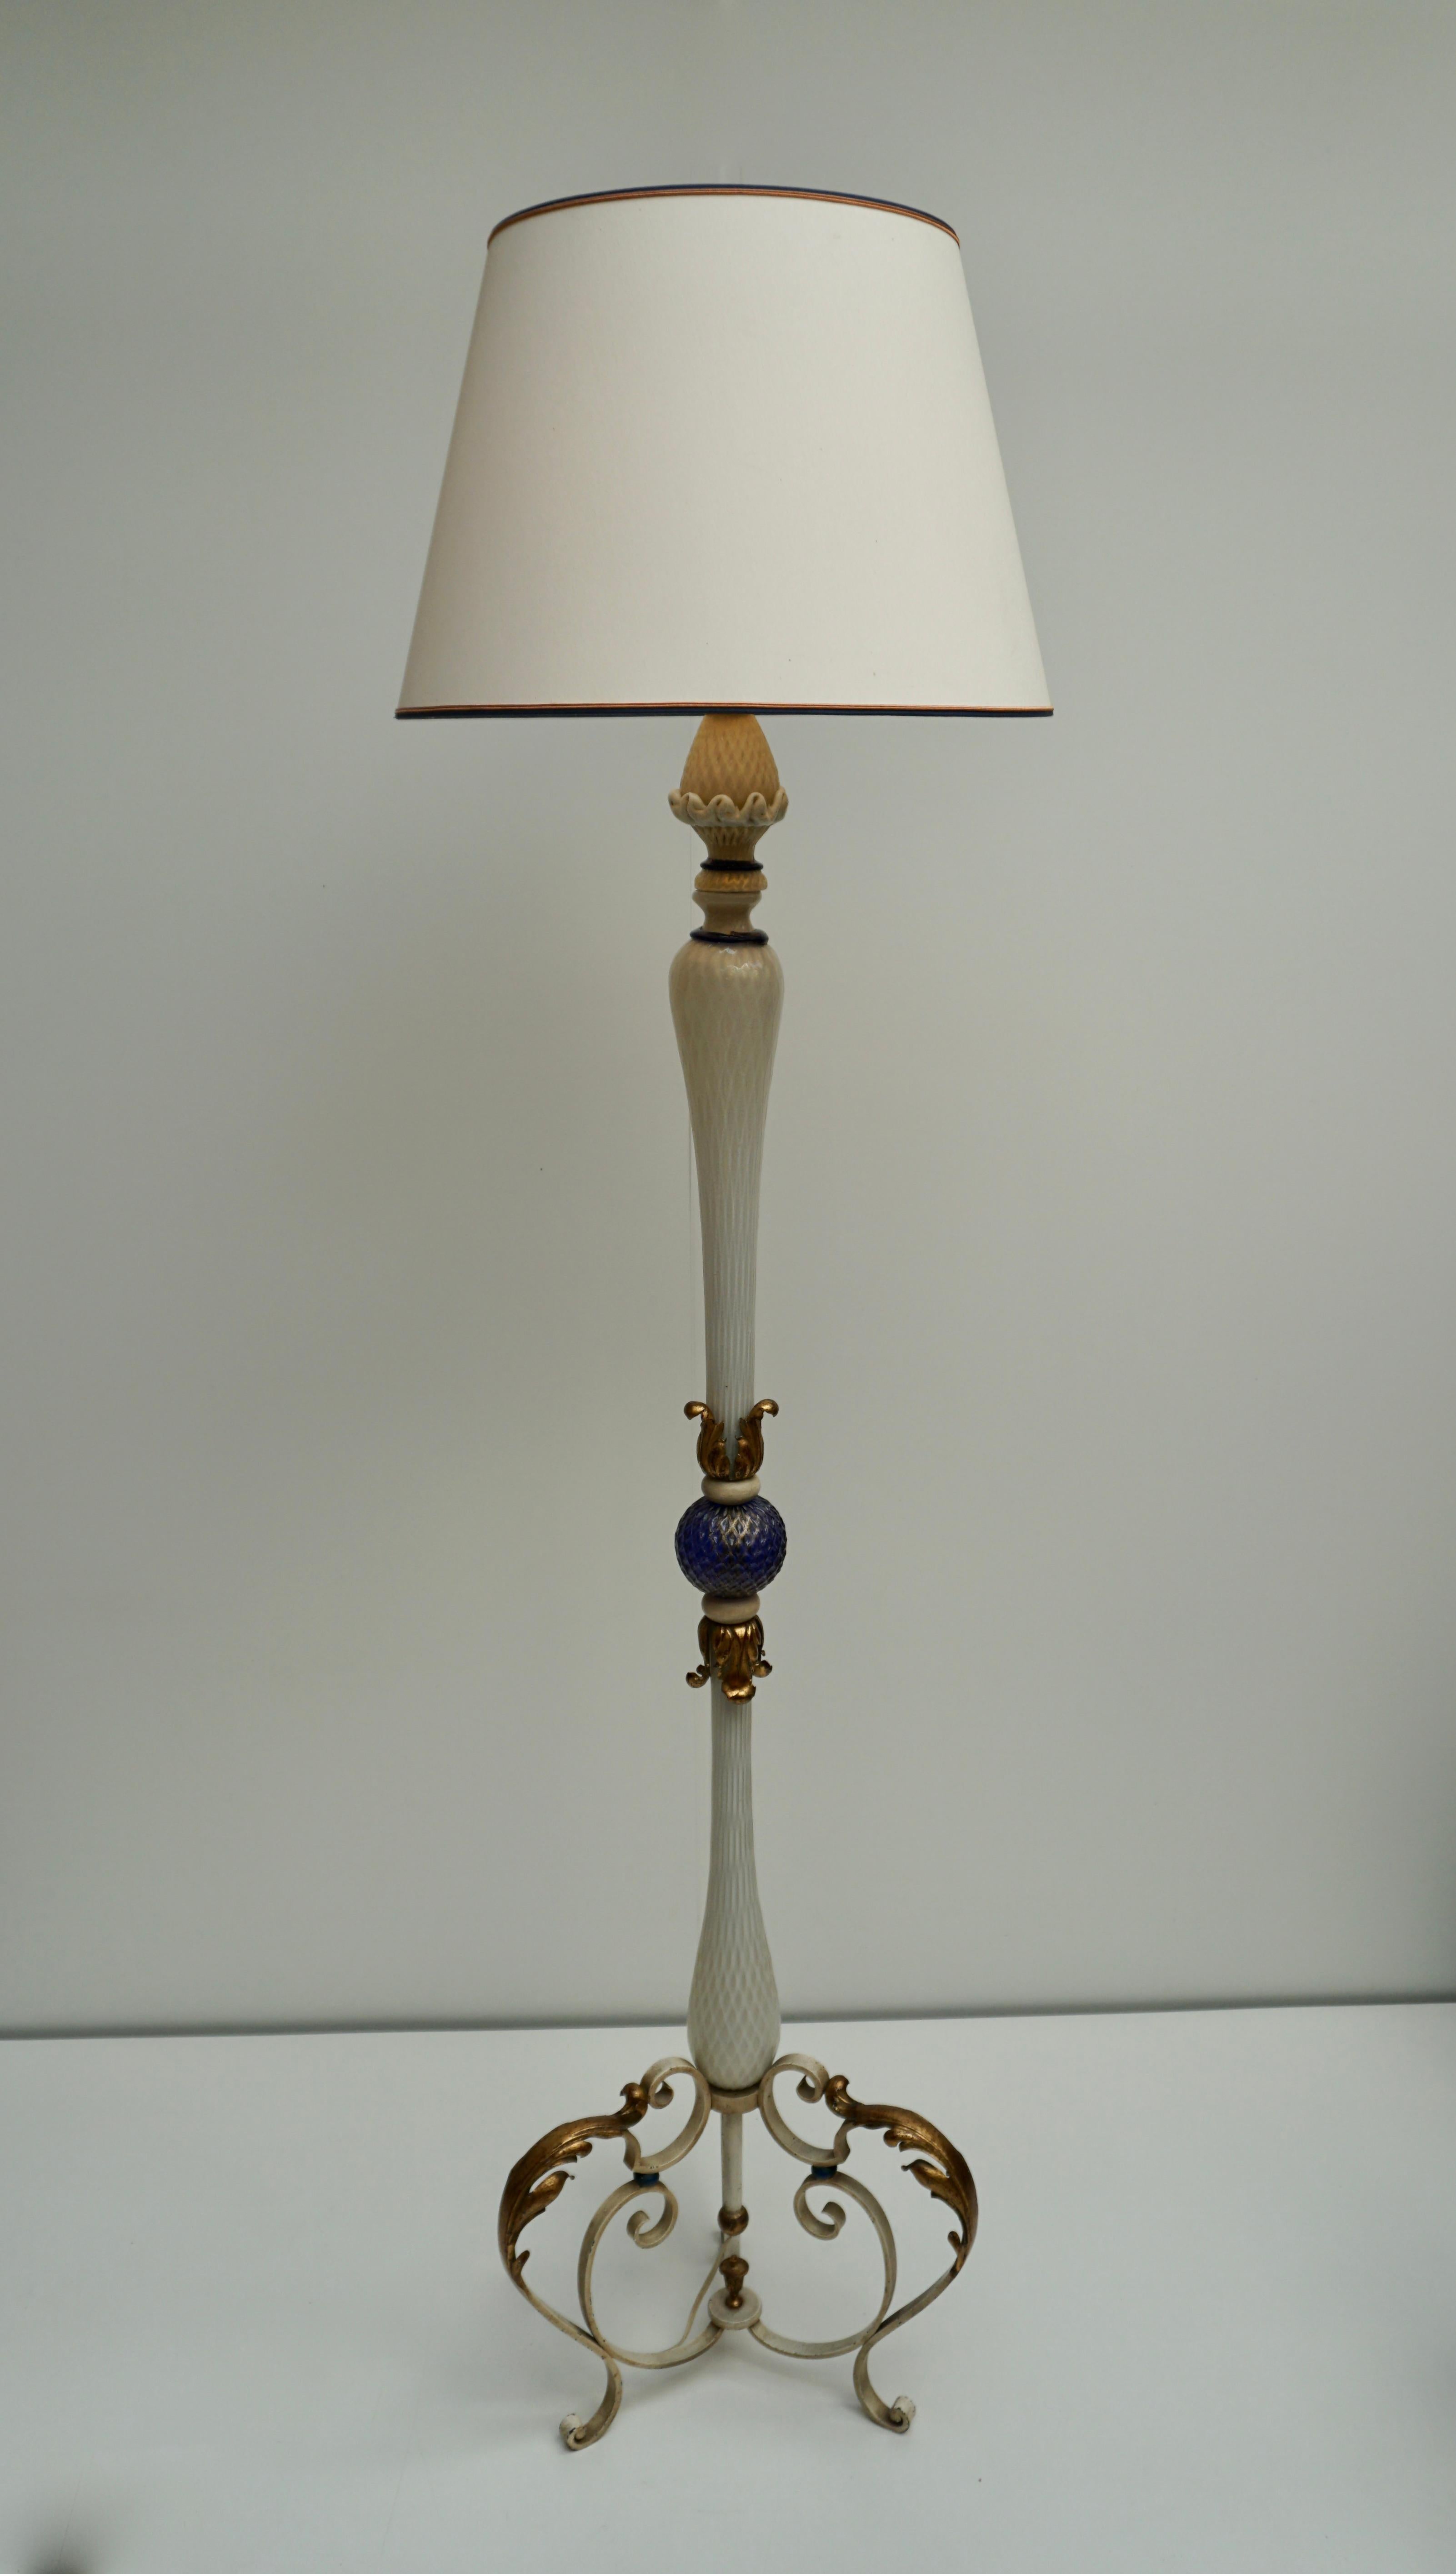 Hollywood Regency Important Murano Gold Inclusion Glass Floor Lamp Attributed to Seguso circa 1948